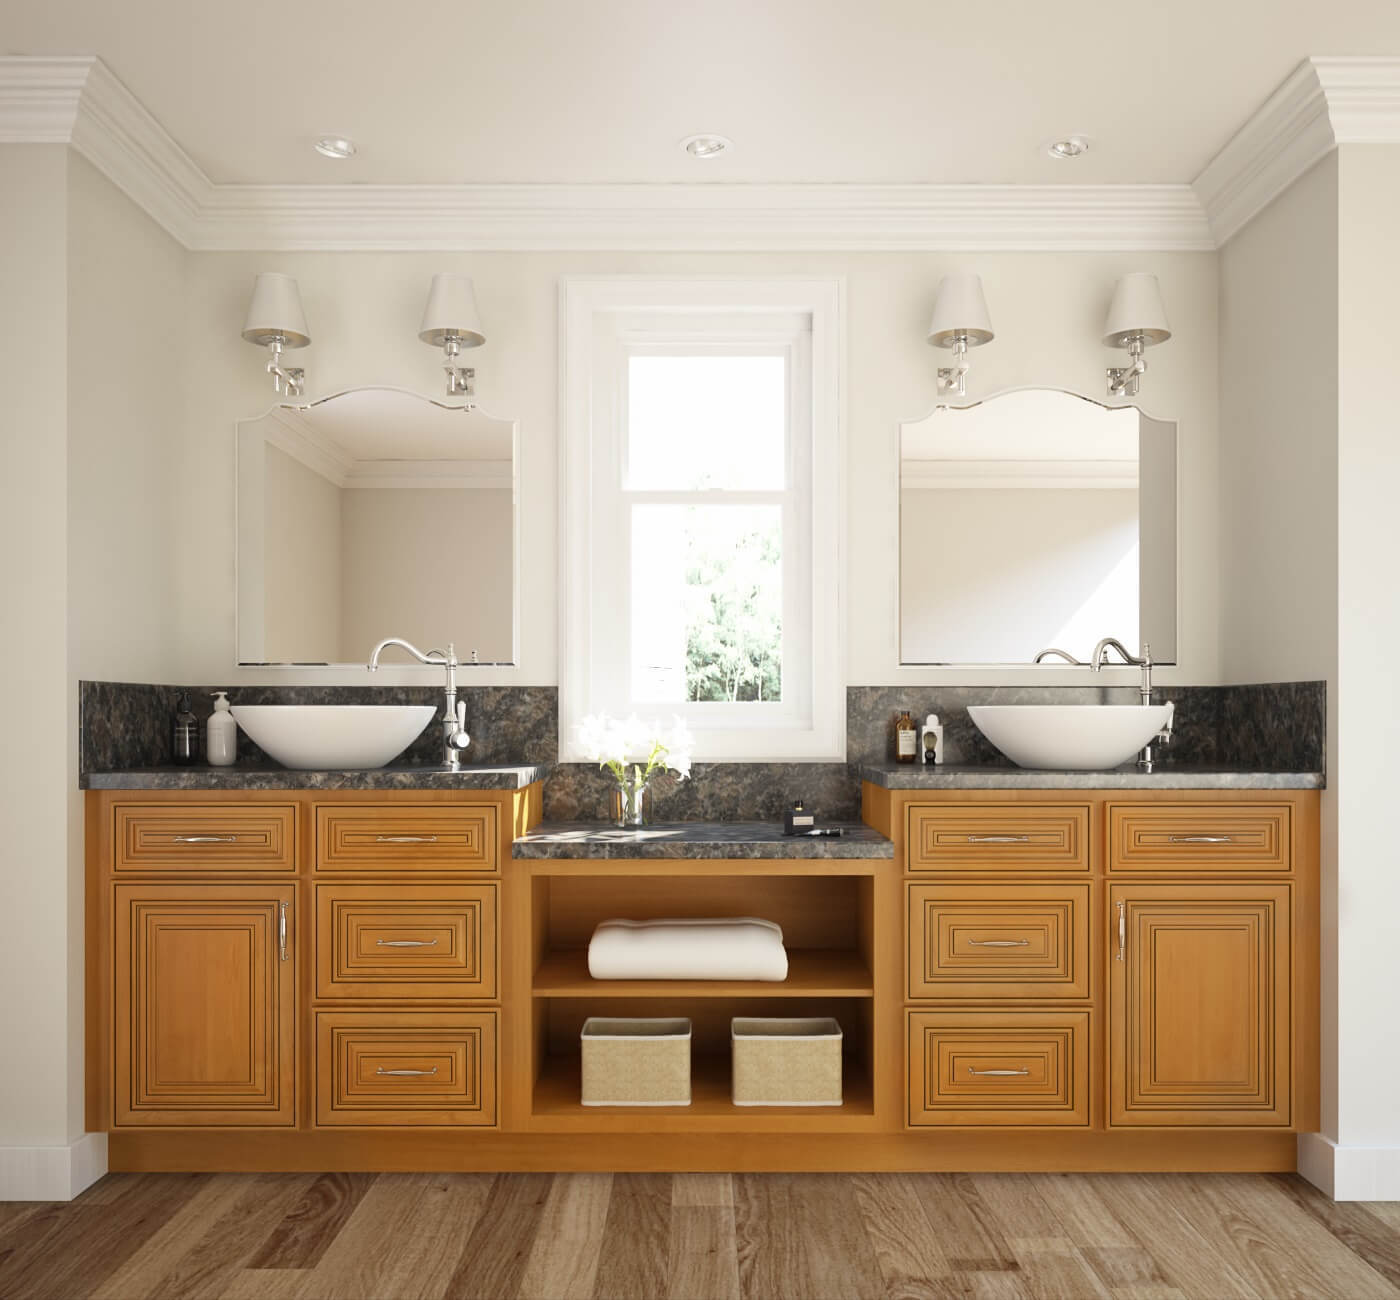 Save money on your next bathroom renovation by choosing ready to assemble cabinets for your bathroom vanity.